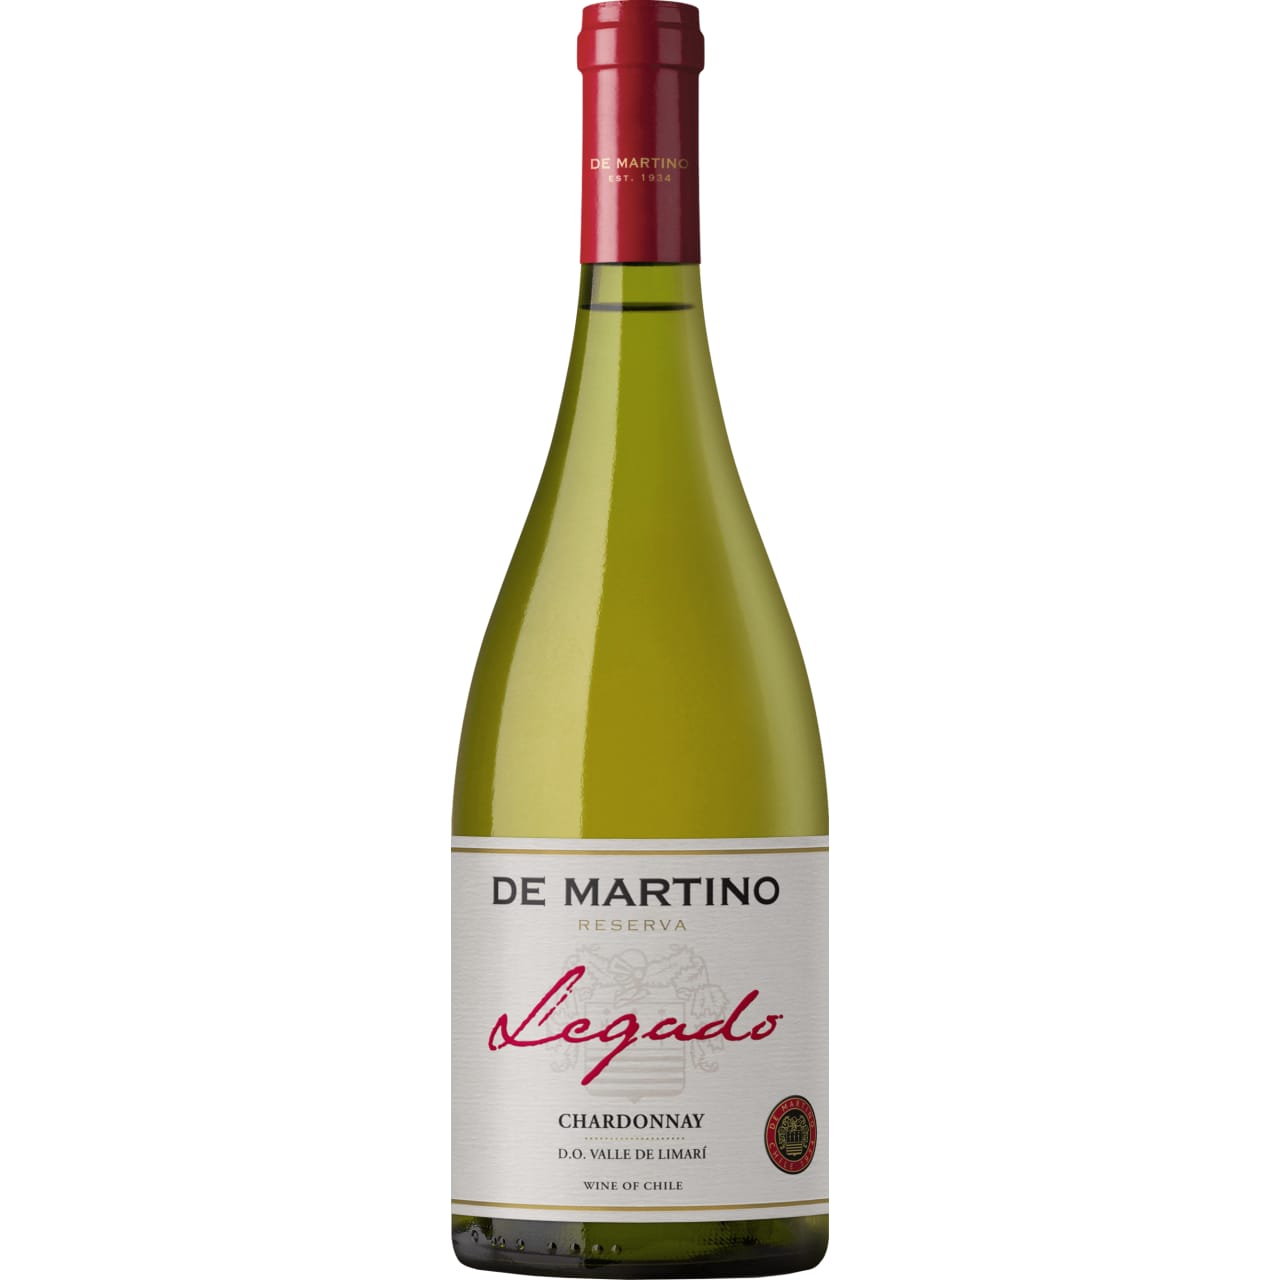 This exceptional Chilean Chardonnay has lively citrus flavours backed with notes of toasted almonds.